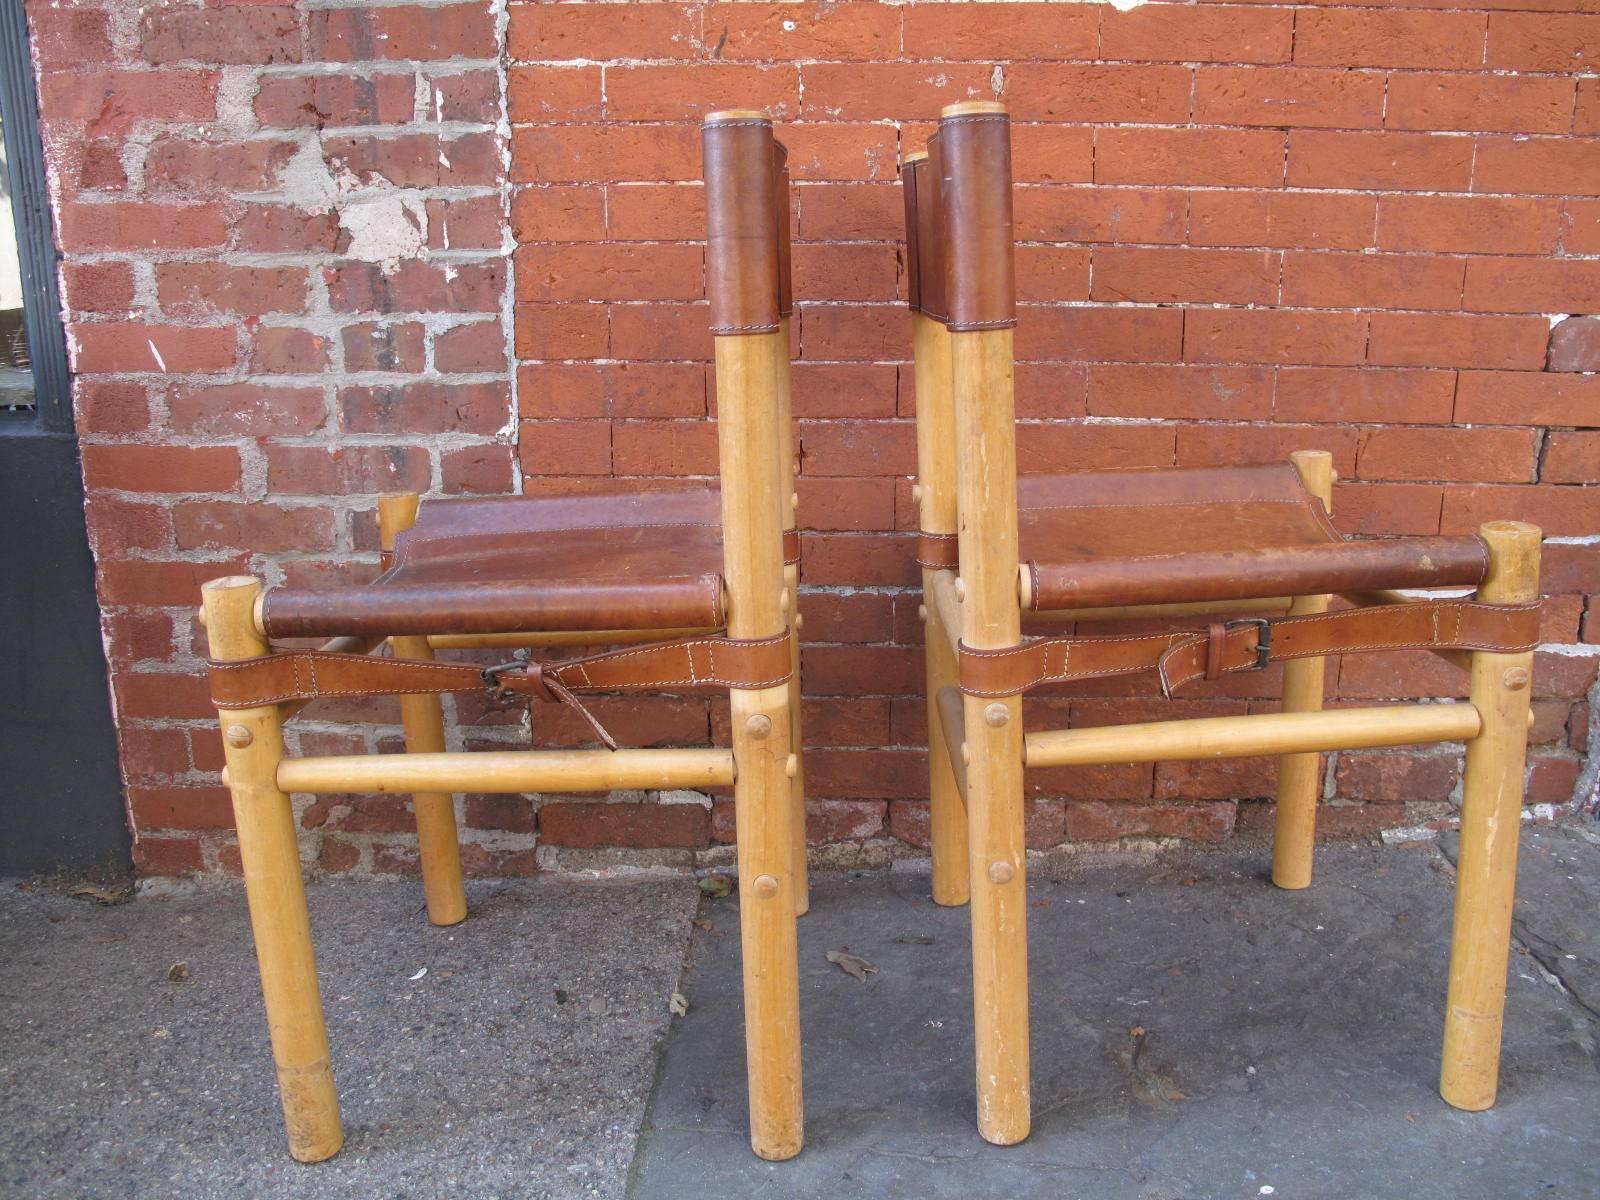 Removable leather seats and backs, held fast by leather straps.

Joints are not glued, with the ability to take chairs apart for transport.

Available as a pair.